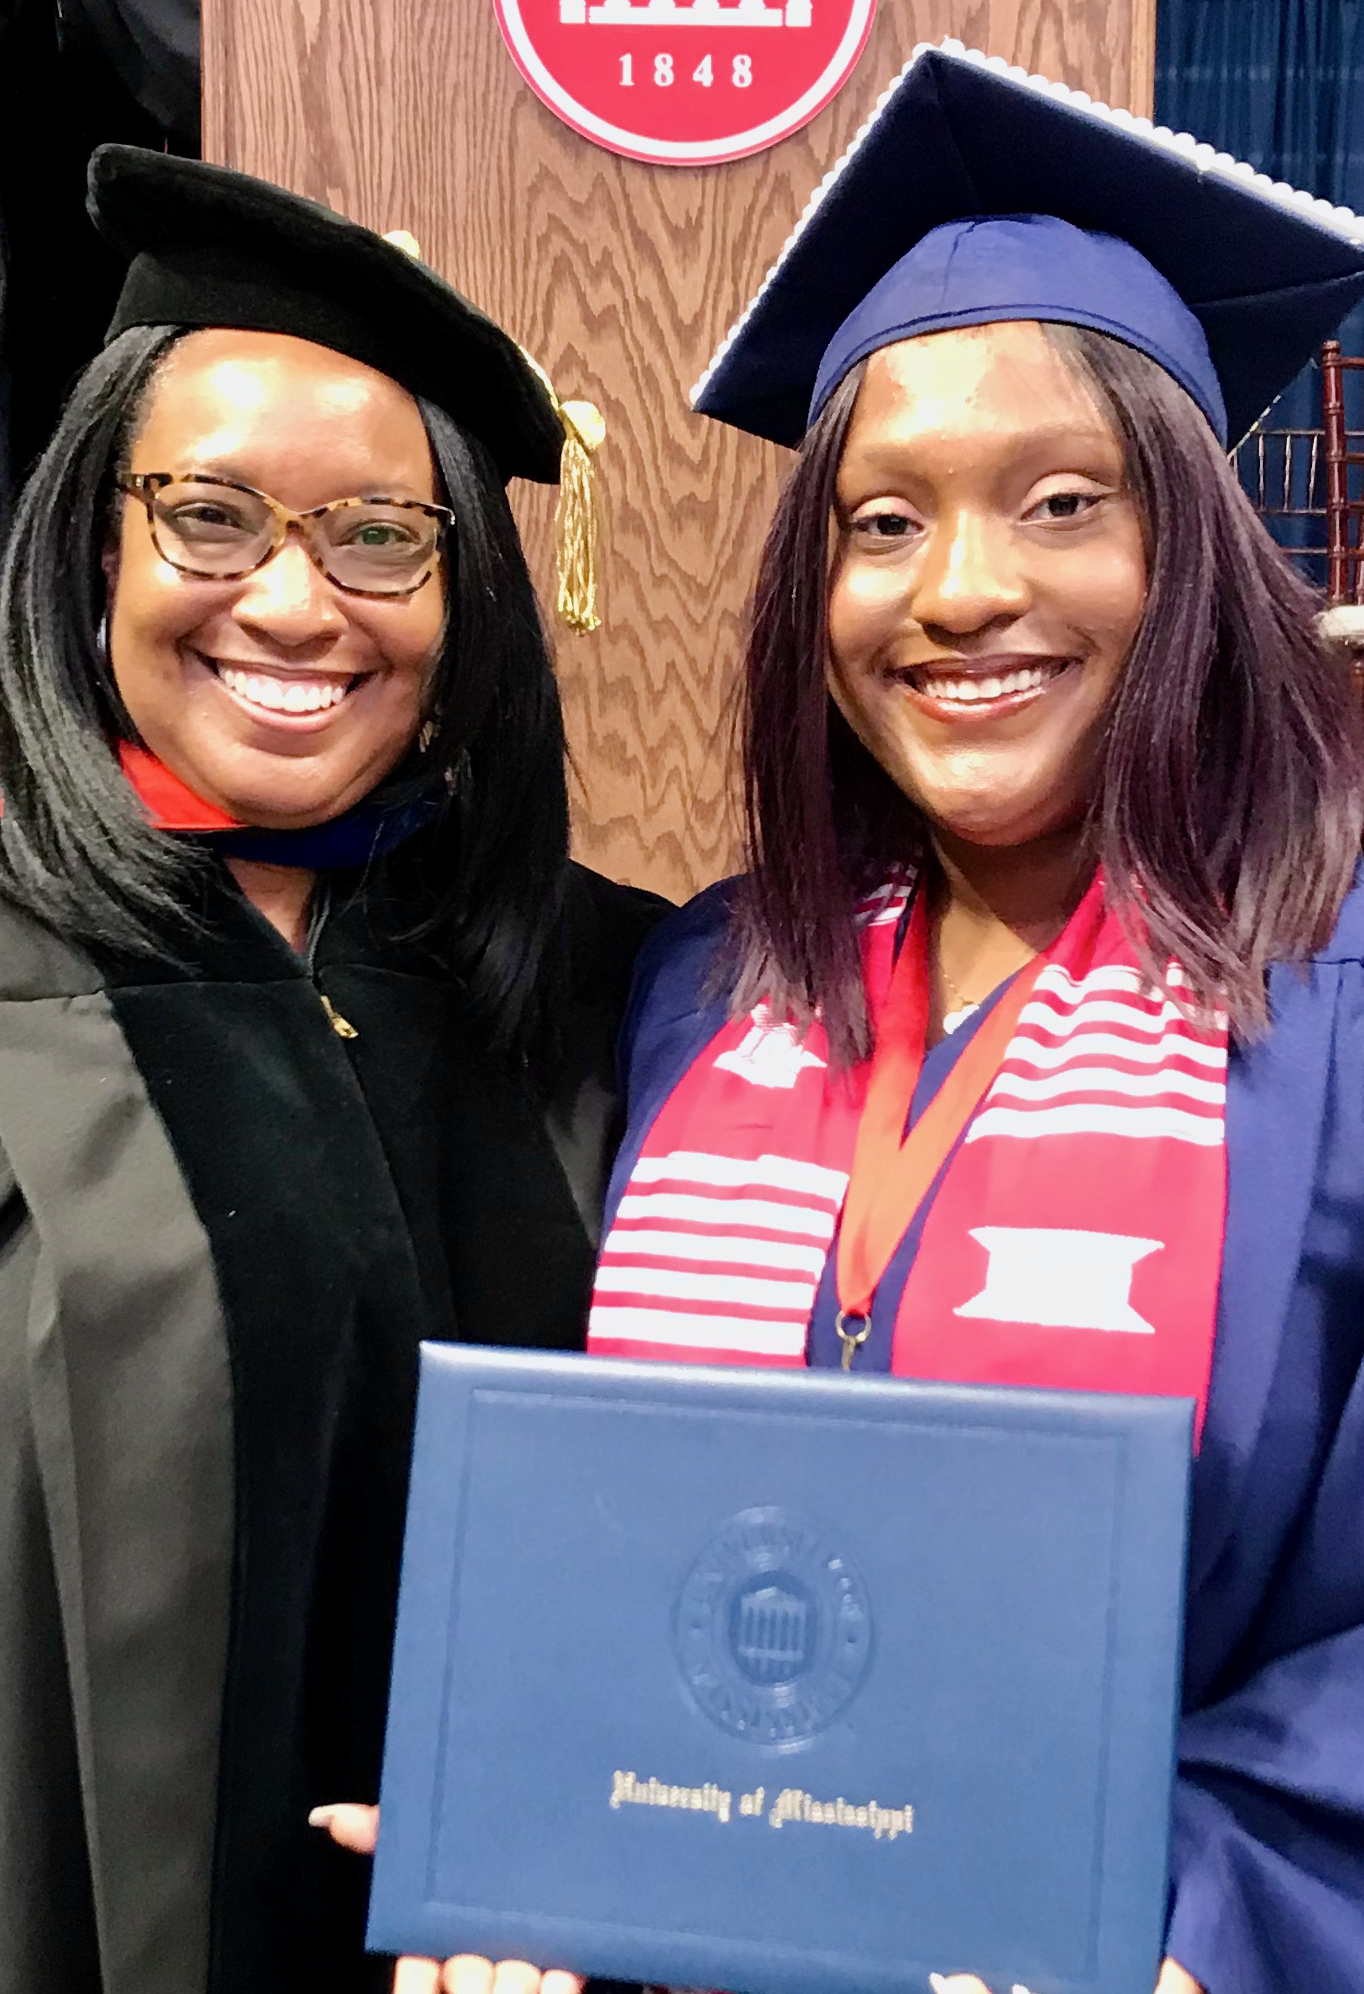 Jasmine Minor (right) celebrates her graduation from UM with her mother, Ethel Scurlock. Scurlock was director of African American studies when Jasmine completed her bachelor’s degree in African American studies in 2019. Submitted photo